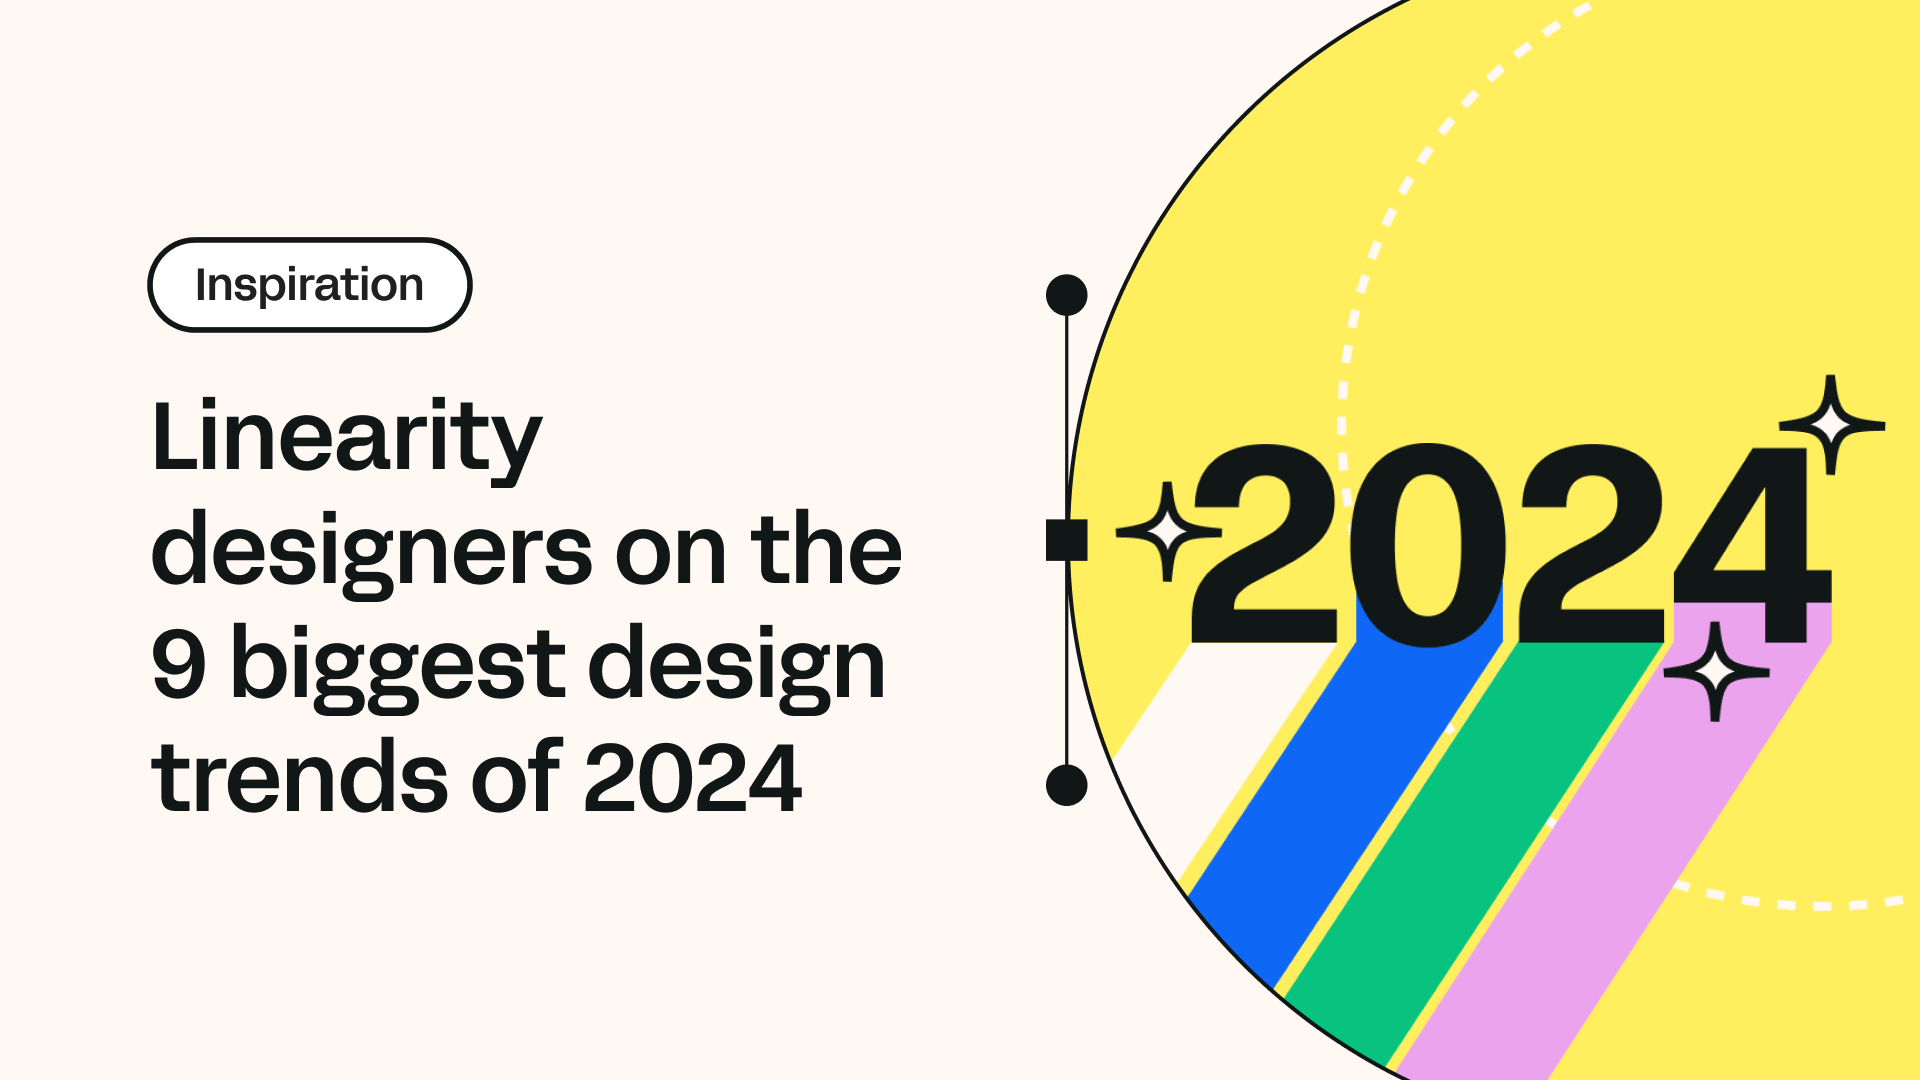 Linearity designers on the 9 biggest design trends of 2024